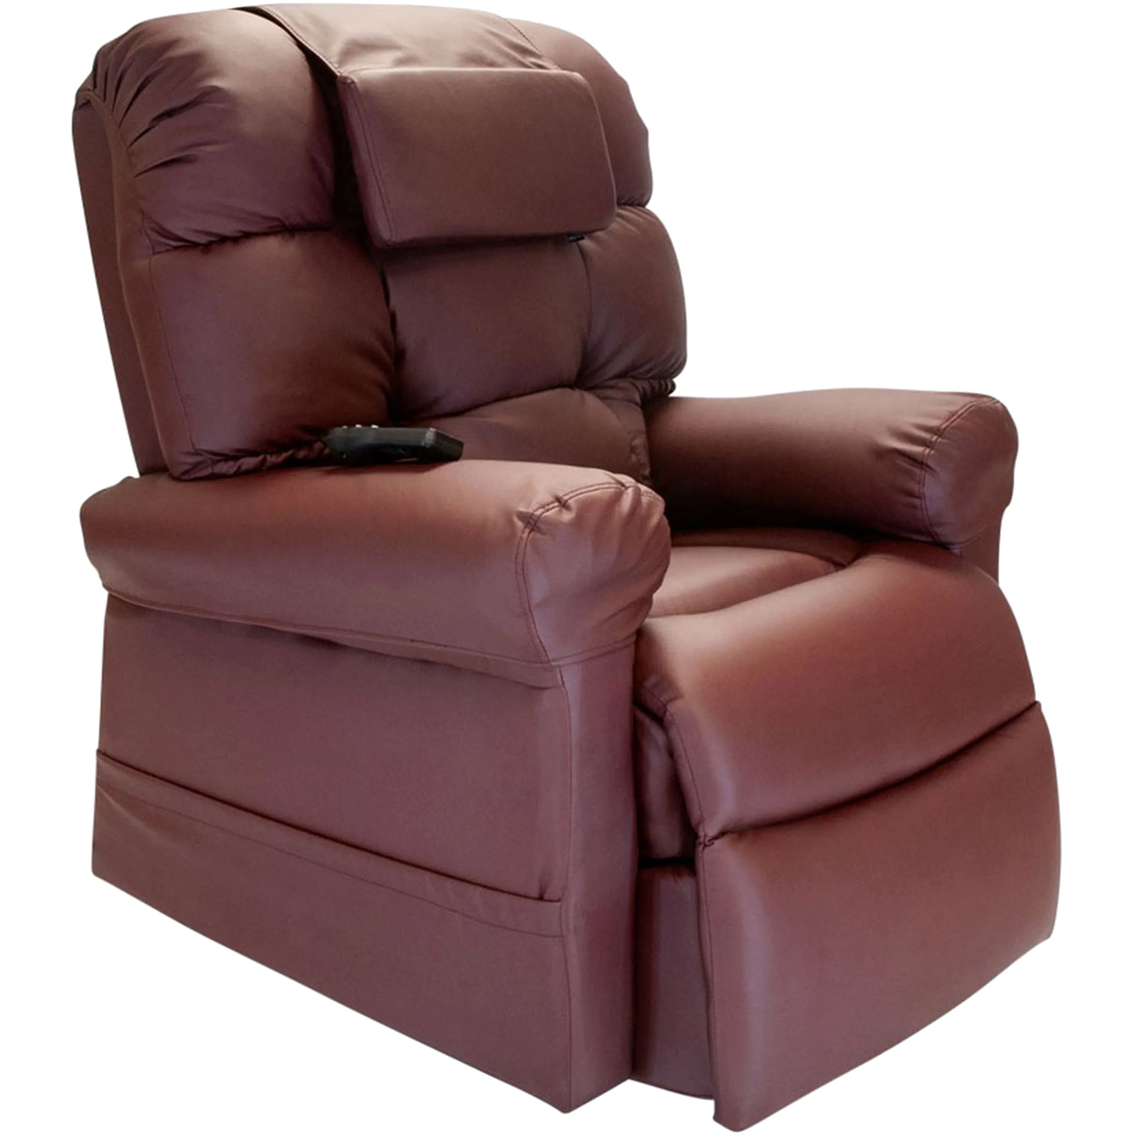 WiseLift WL450R Sleeper Recliner Chair - Image 2 of 8